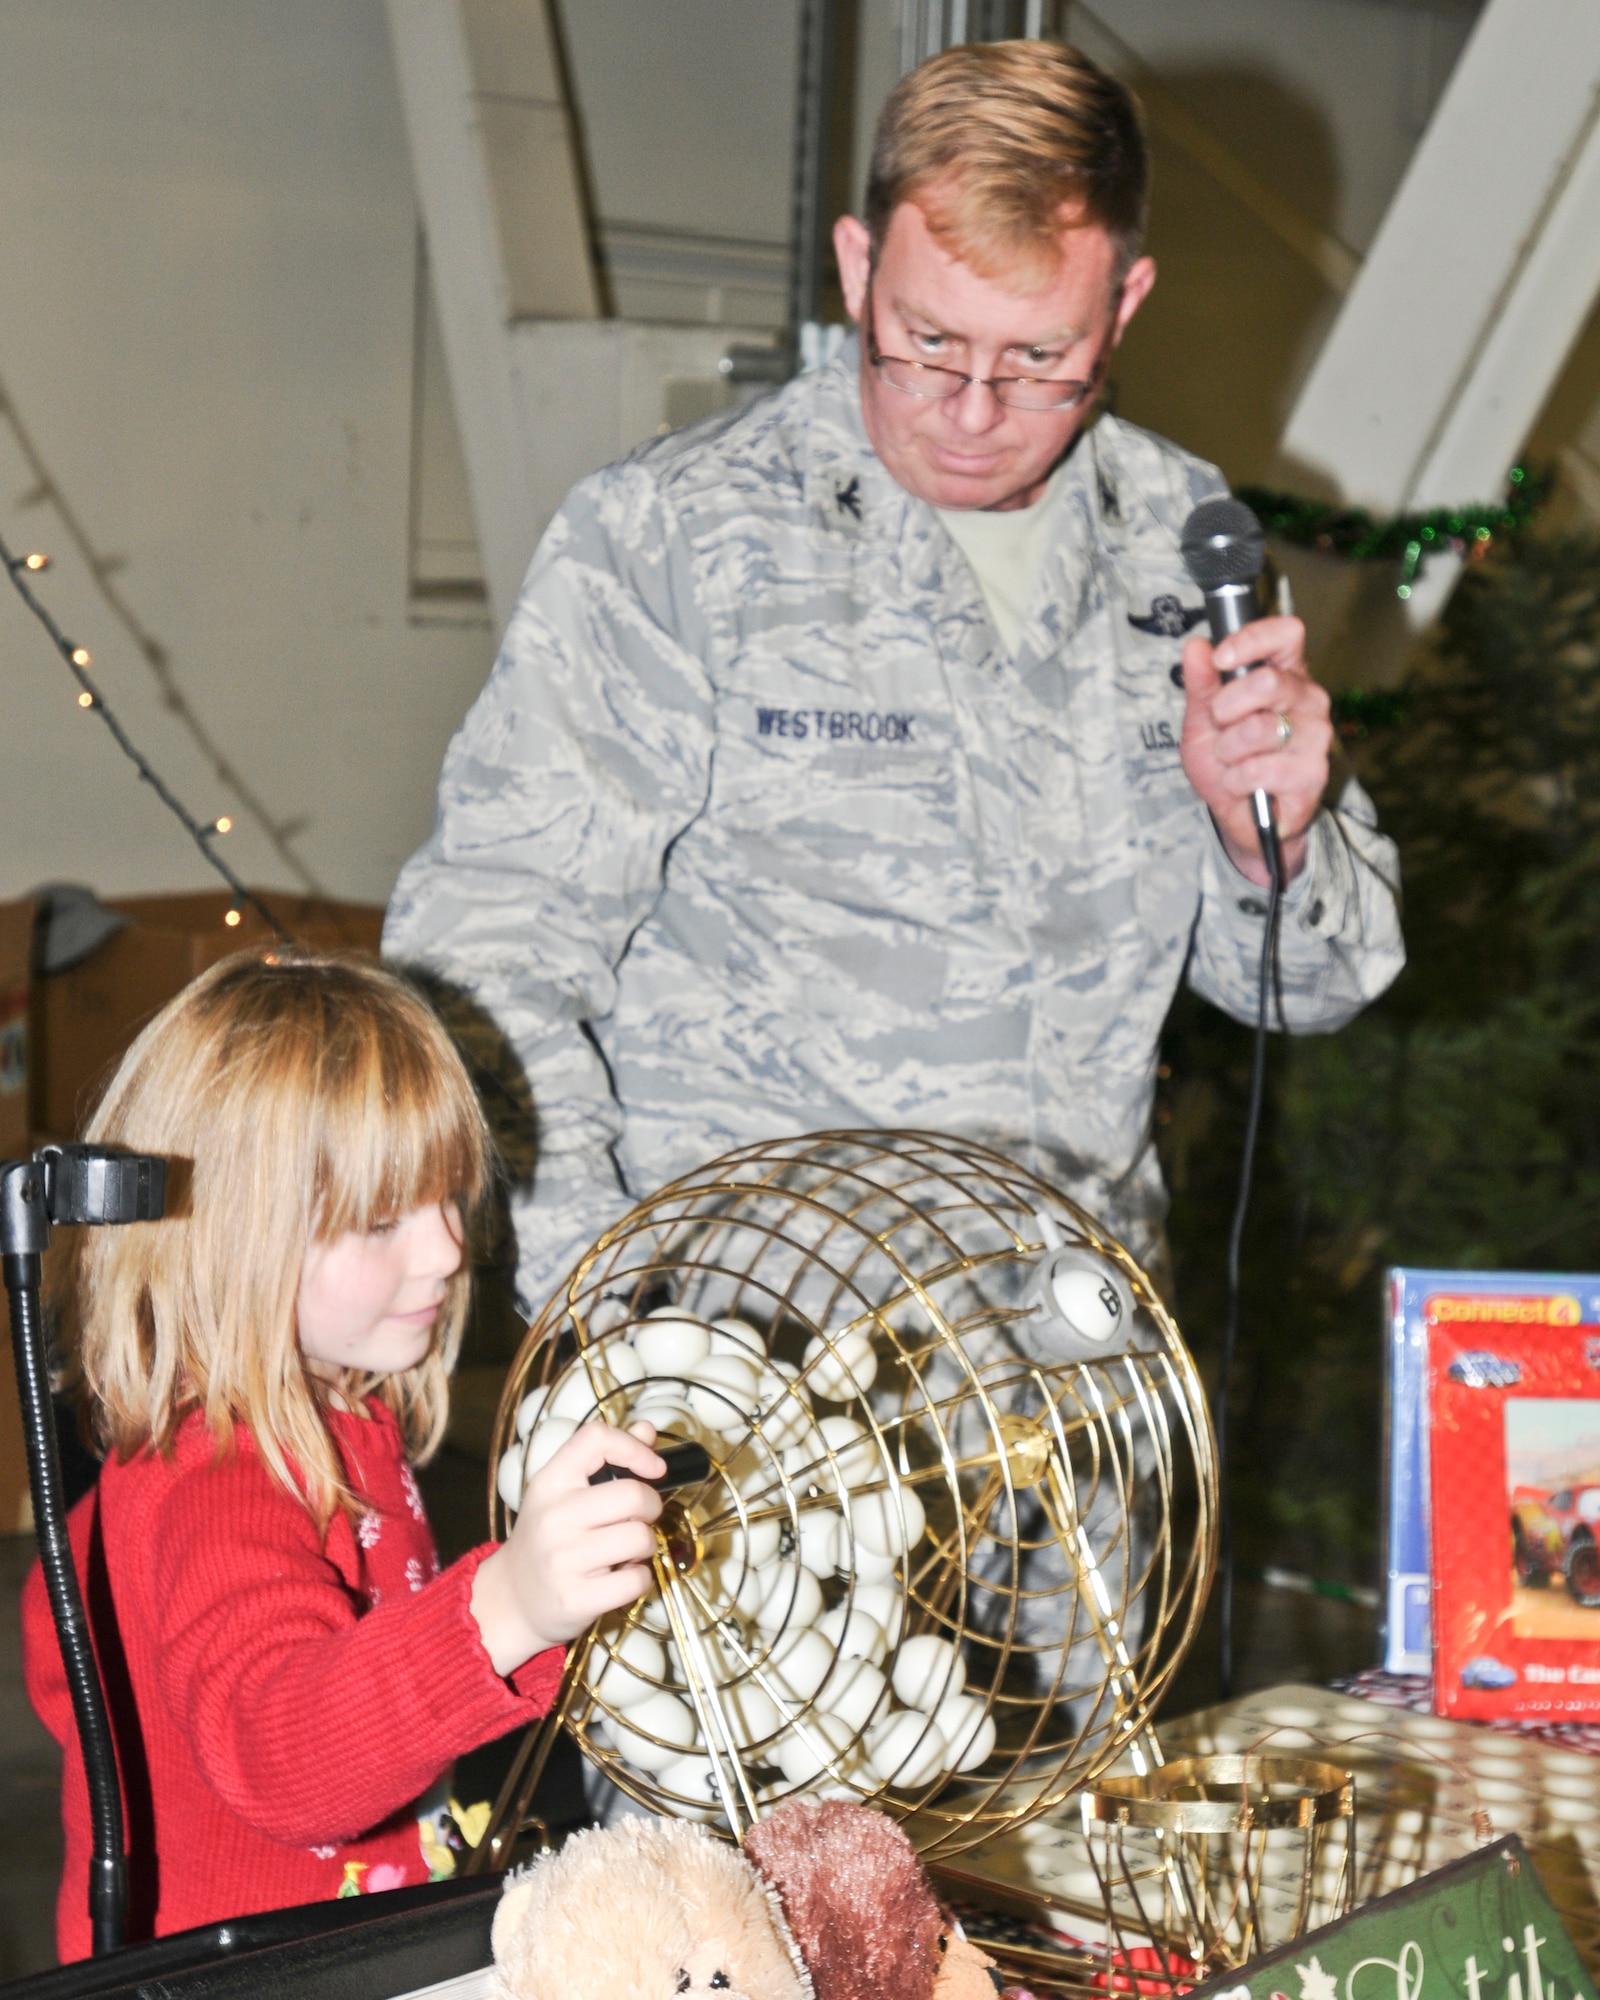 141st Air Refueling Wing members and their families enjoyed festivities at the annual Christmas party in Hanger 2050, Fairchild Air Force Base, Wash. on Dec. 3, 2011. (U.S. Air Force photos by Master Sgt Mindy Gagne)